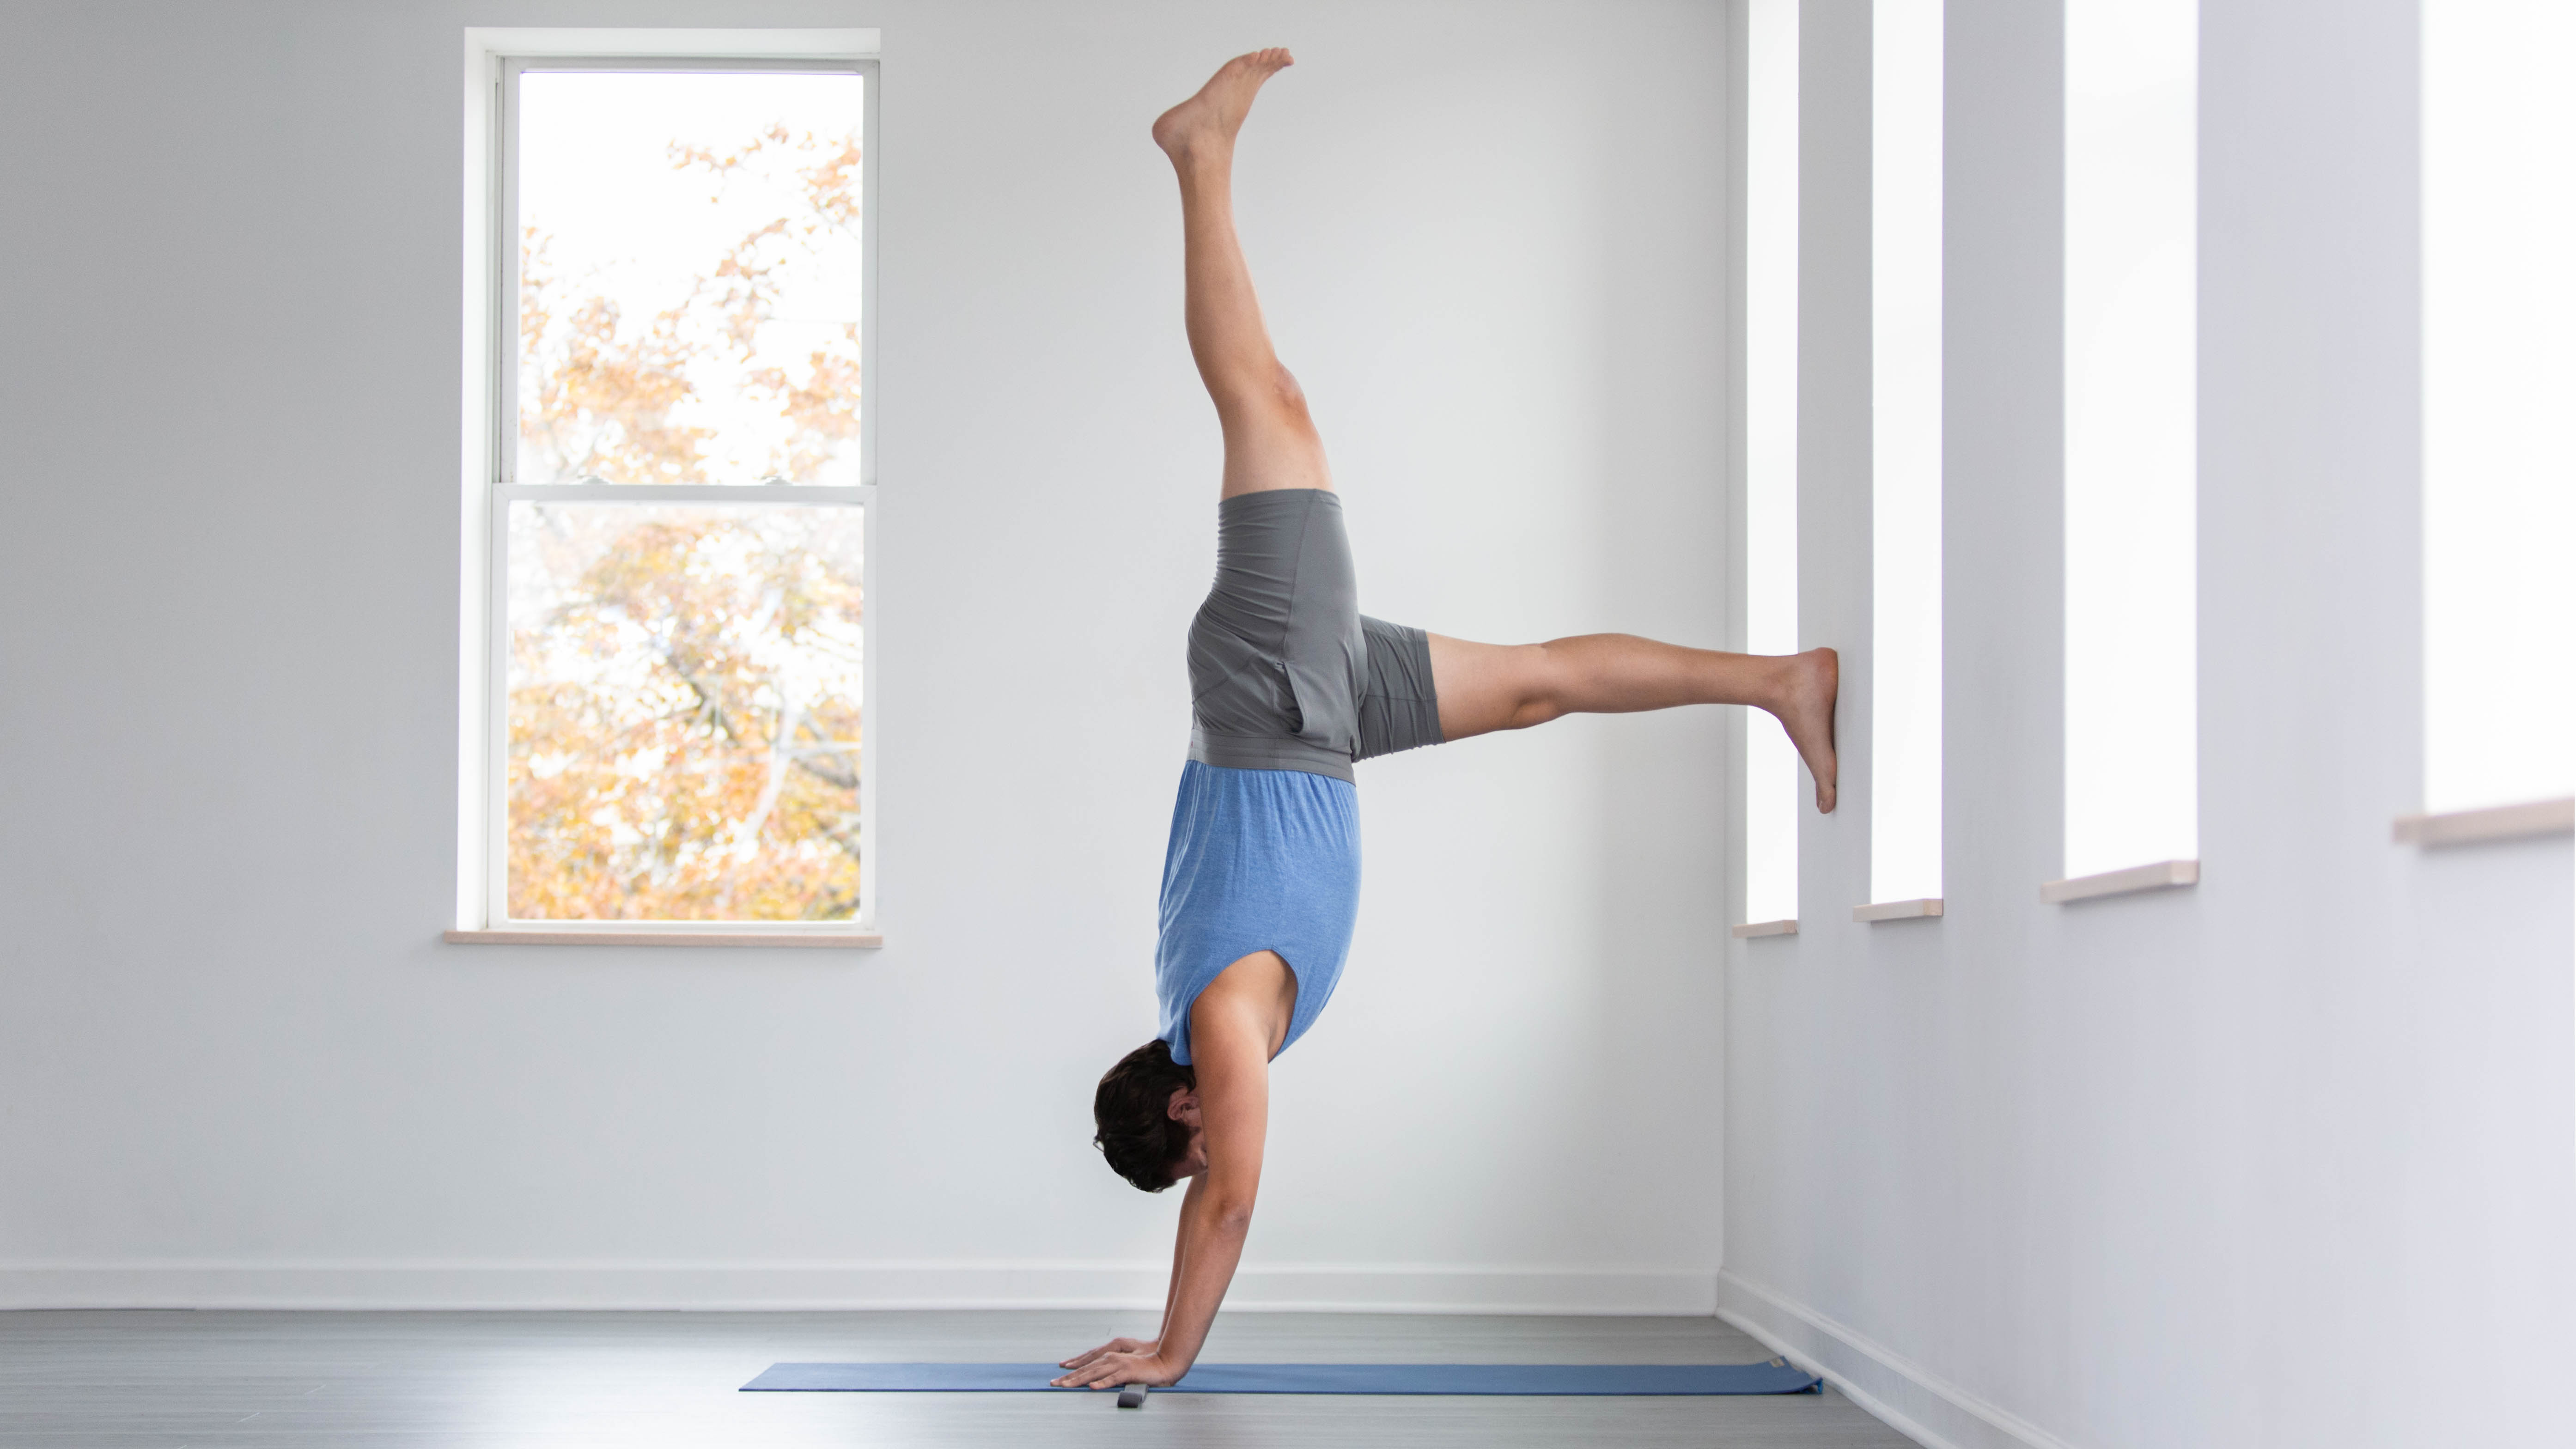 Master These 10 Yoga Poses Before Even Attempting Handstand - YOGA PRACTICE